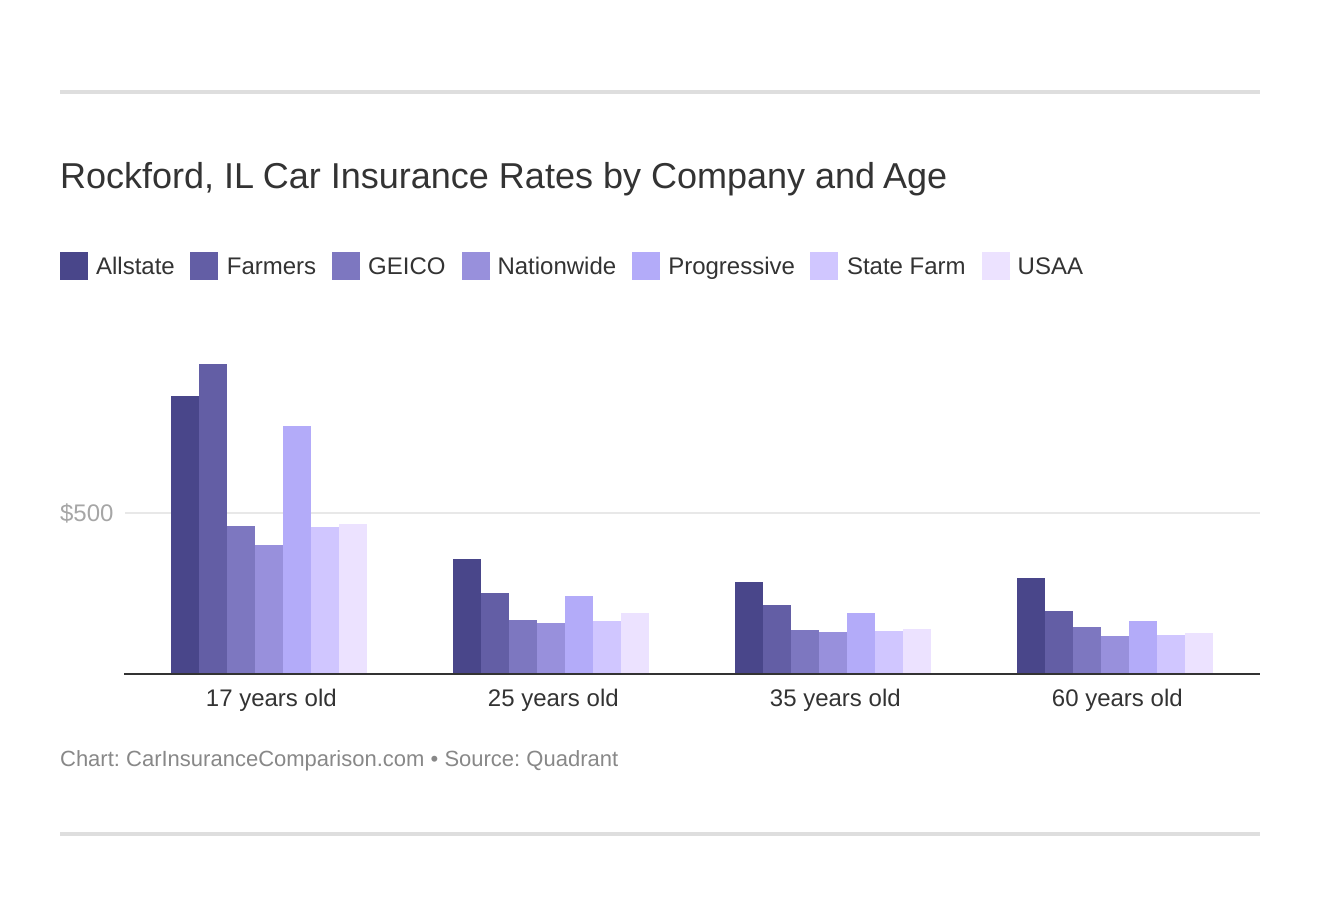 Rockford, IL Car Insurance Rates by Company and Age